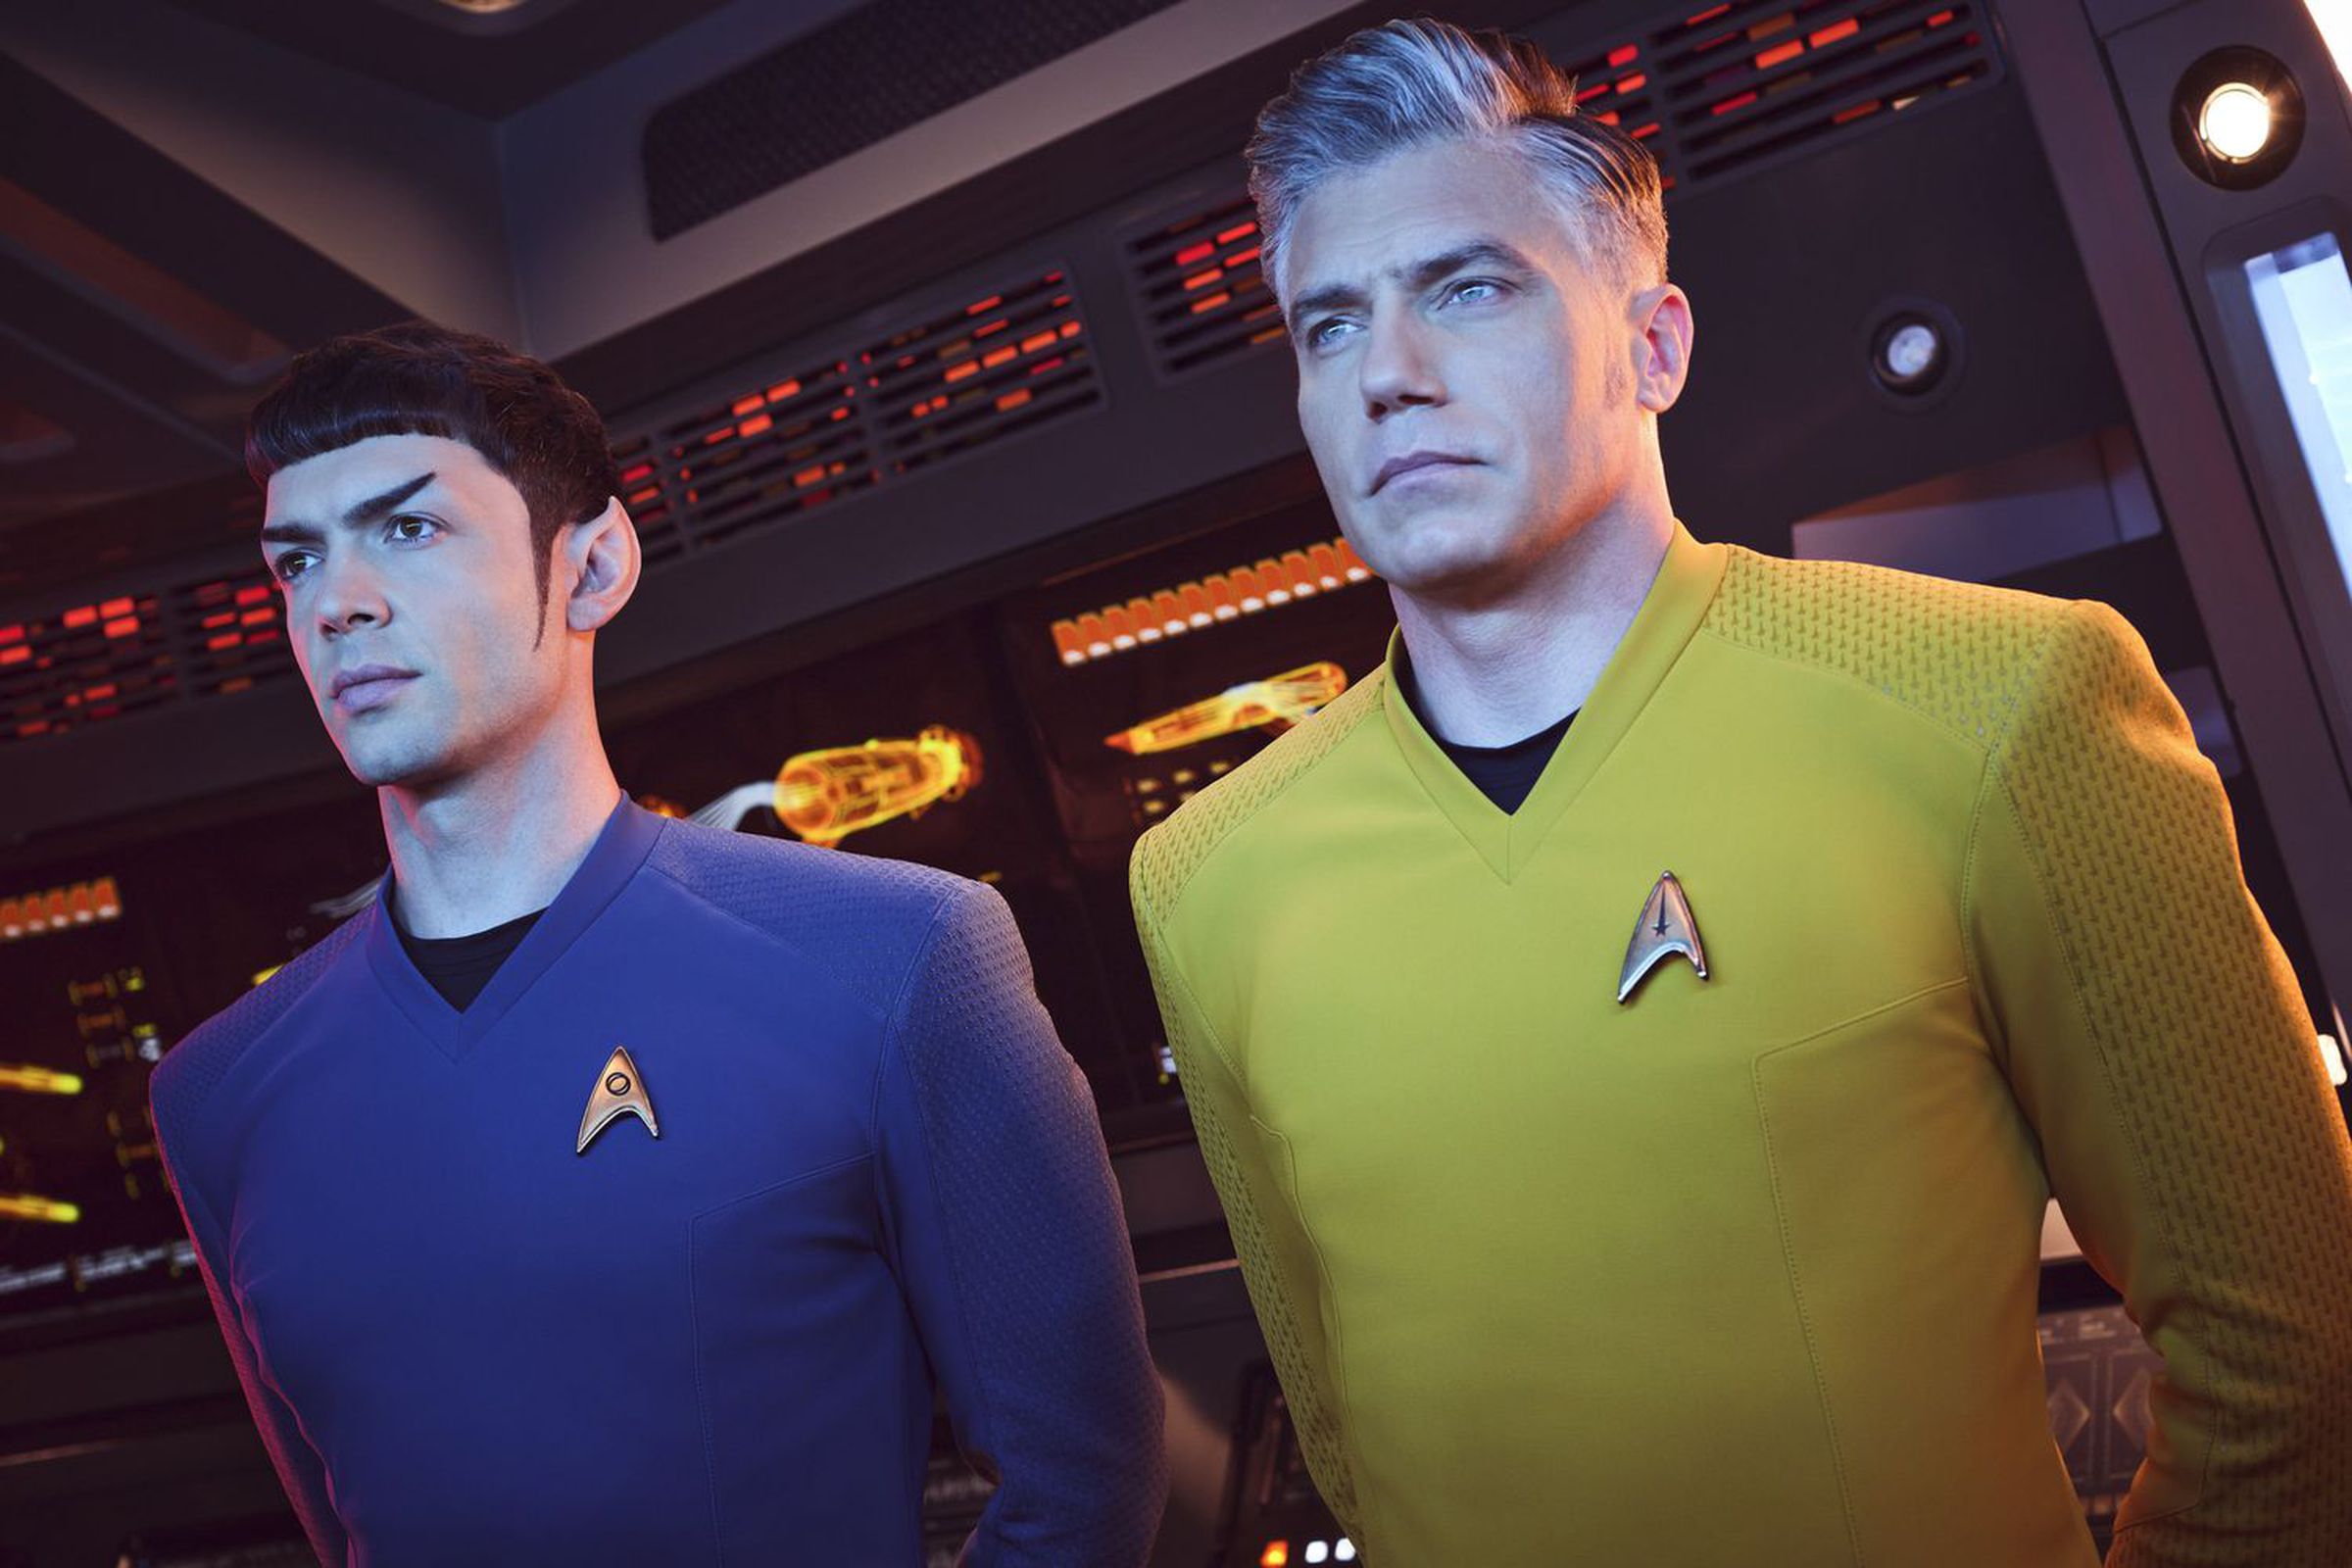 Two men, one wearing a blue shirt, and the other wearing a yellow short, standing with their arms behind their backs in a futuristic control room.